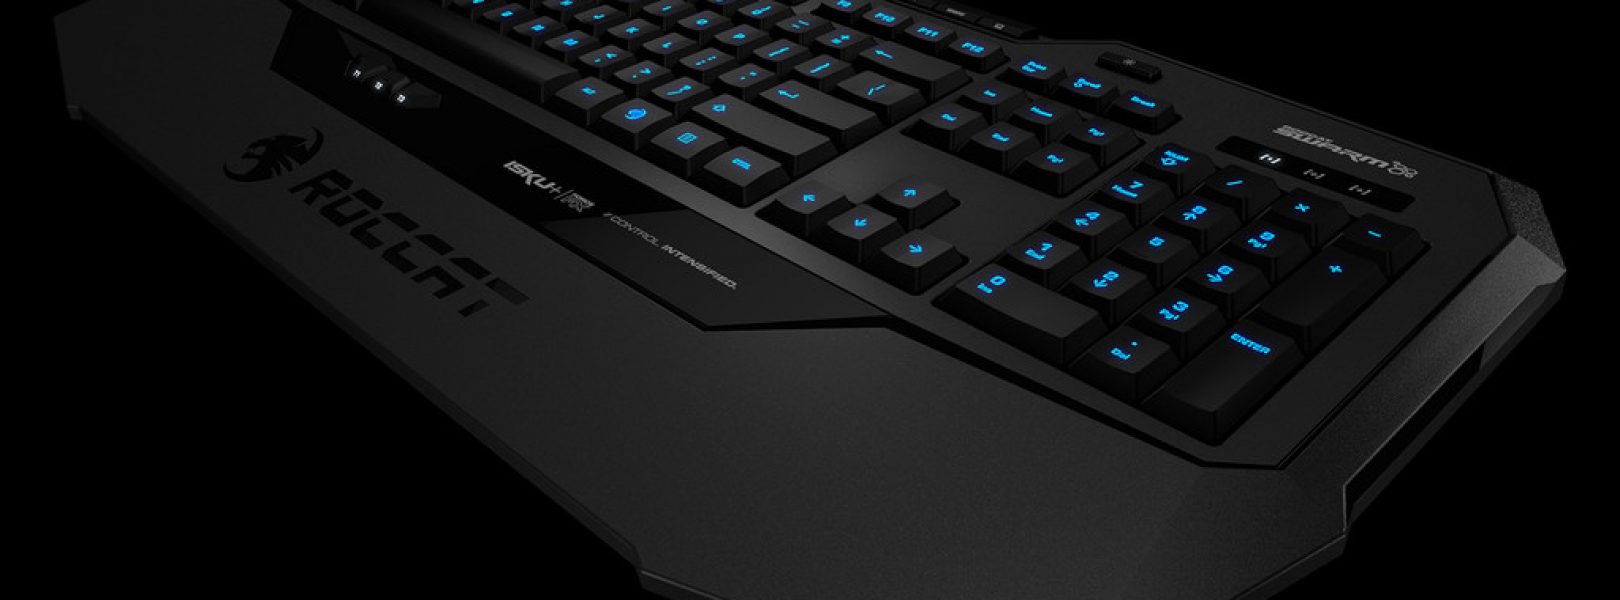 New Roccat Products Available For Pre-order In Australia - Product Ces 2017 , HD Wallpaper & Backgrounds